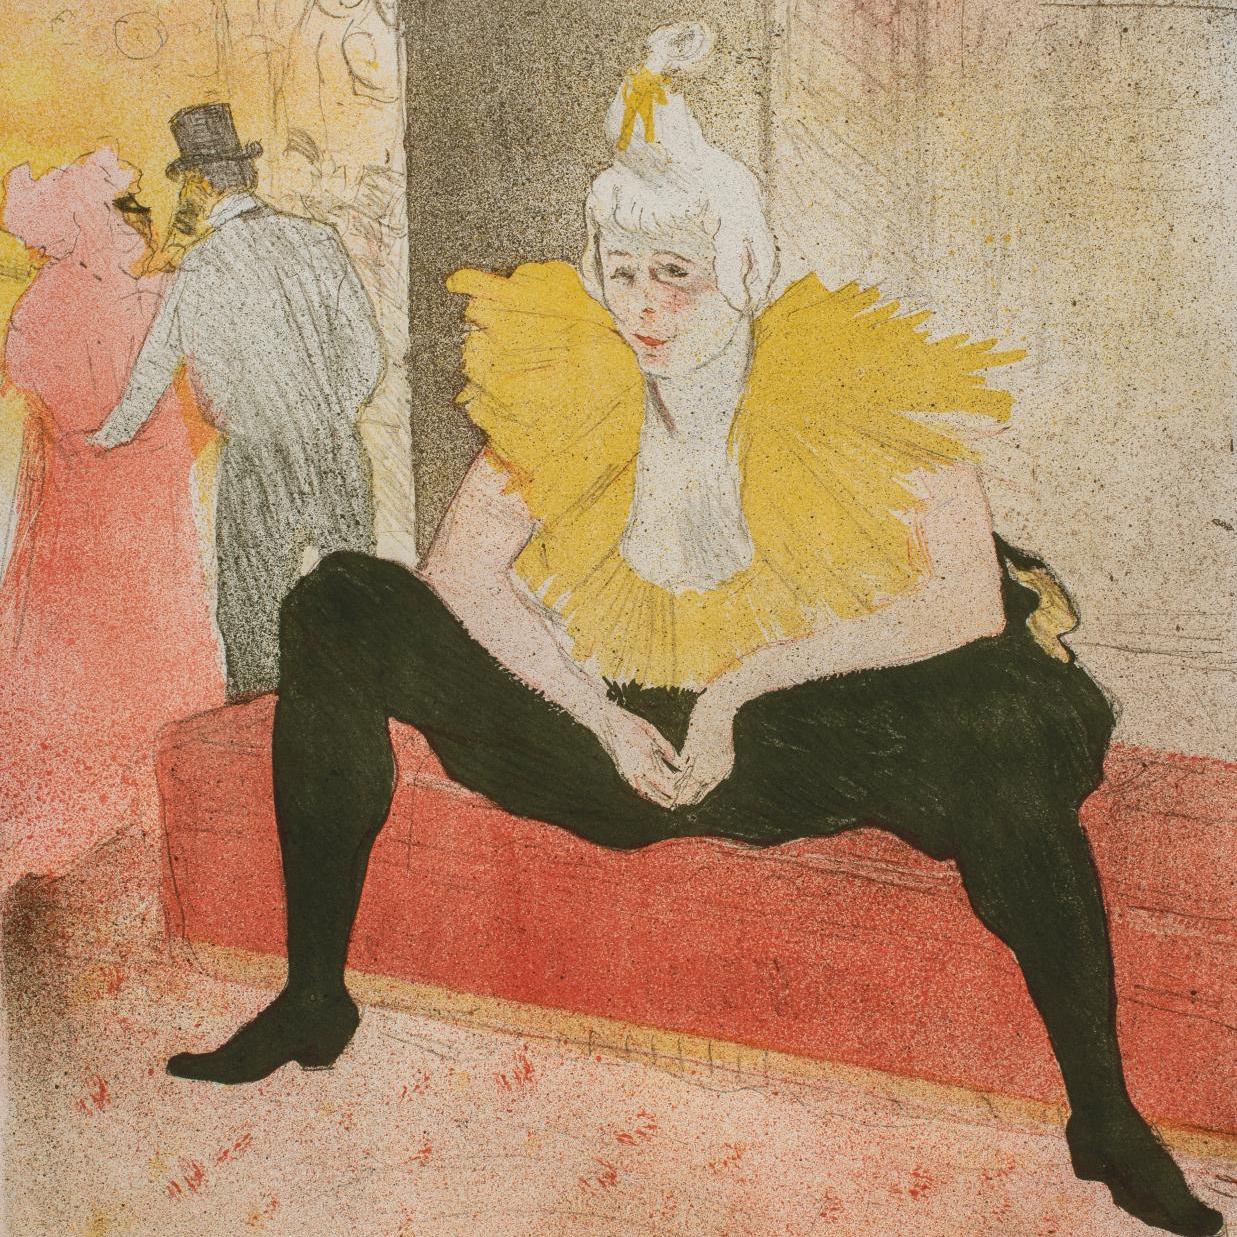 Toulouse-Lautrec Prints Come Out on Top - Lots sold